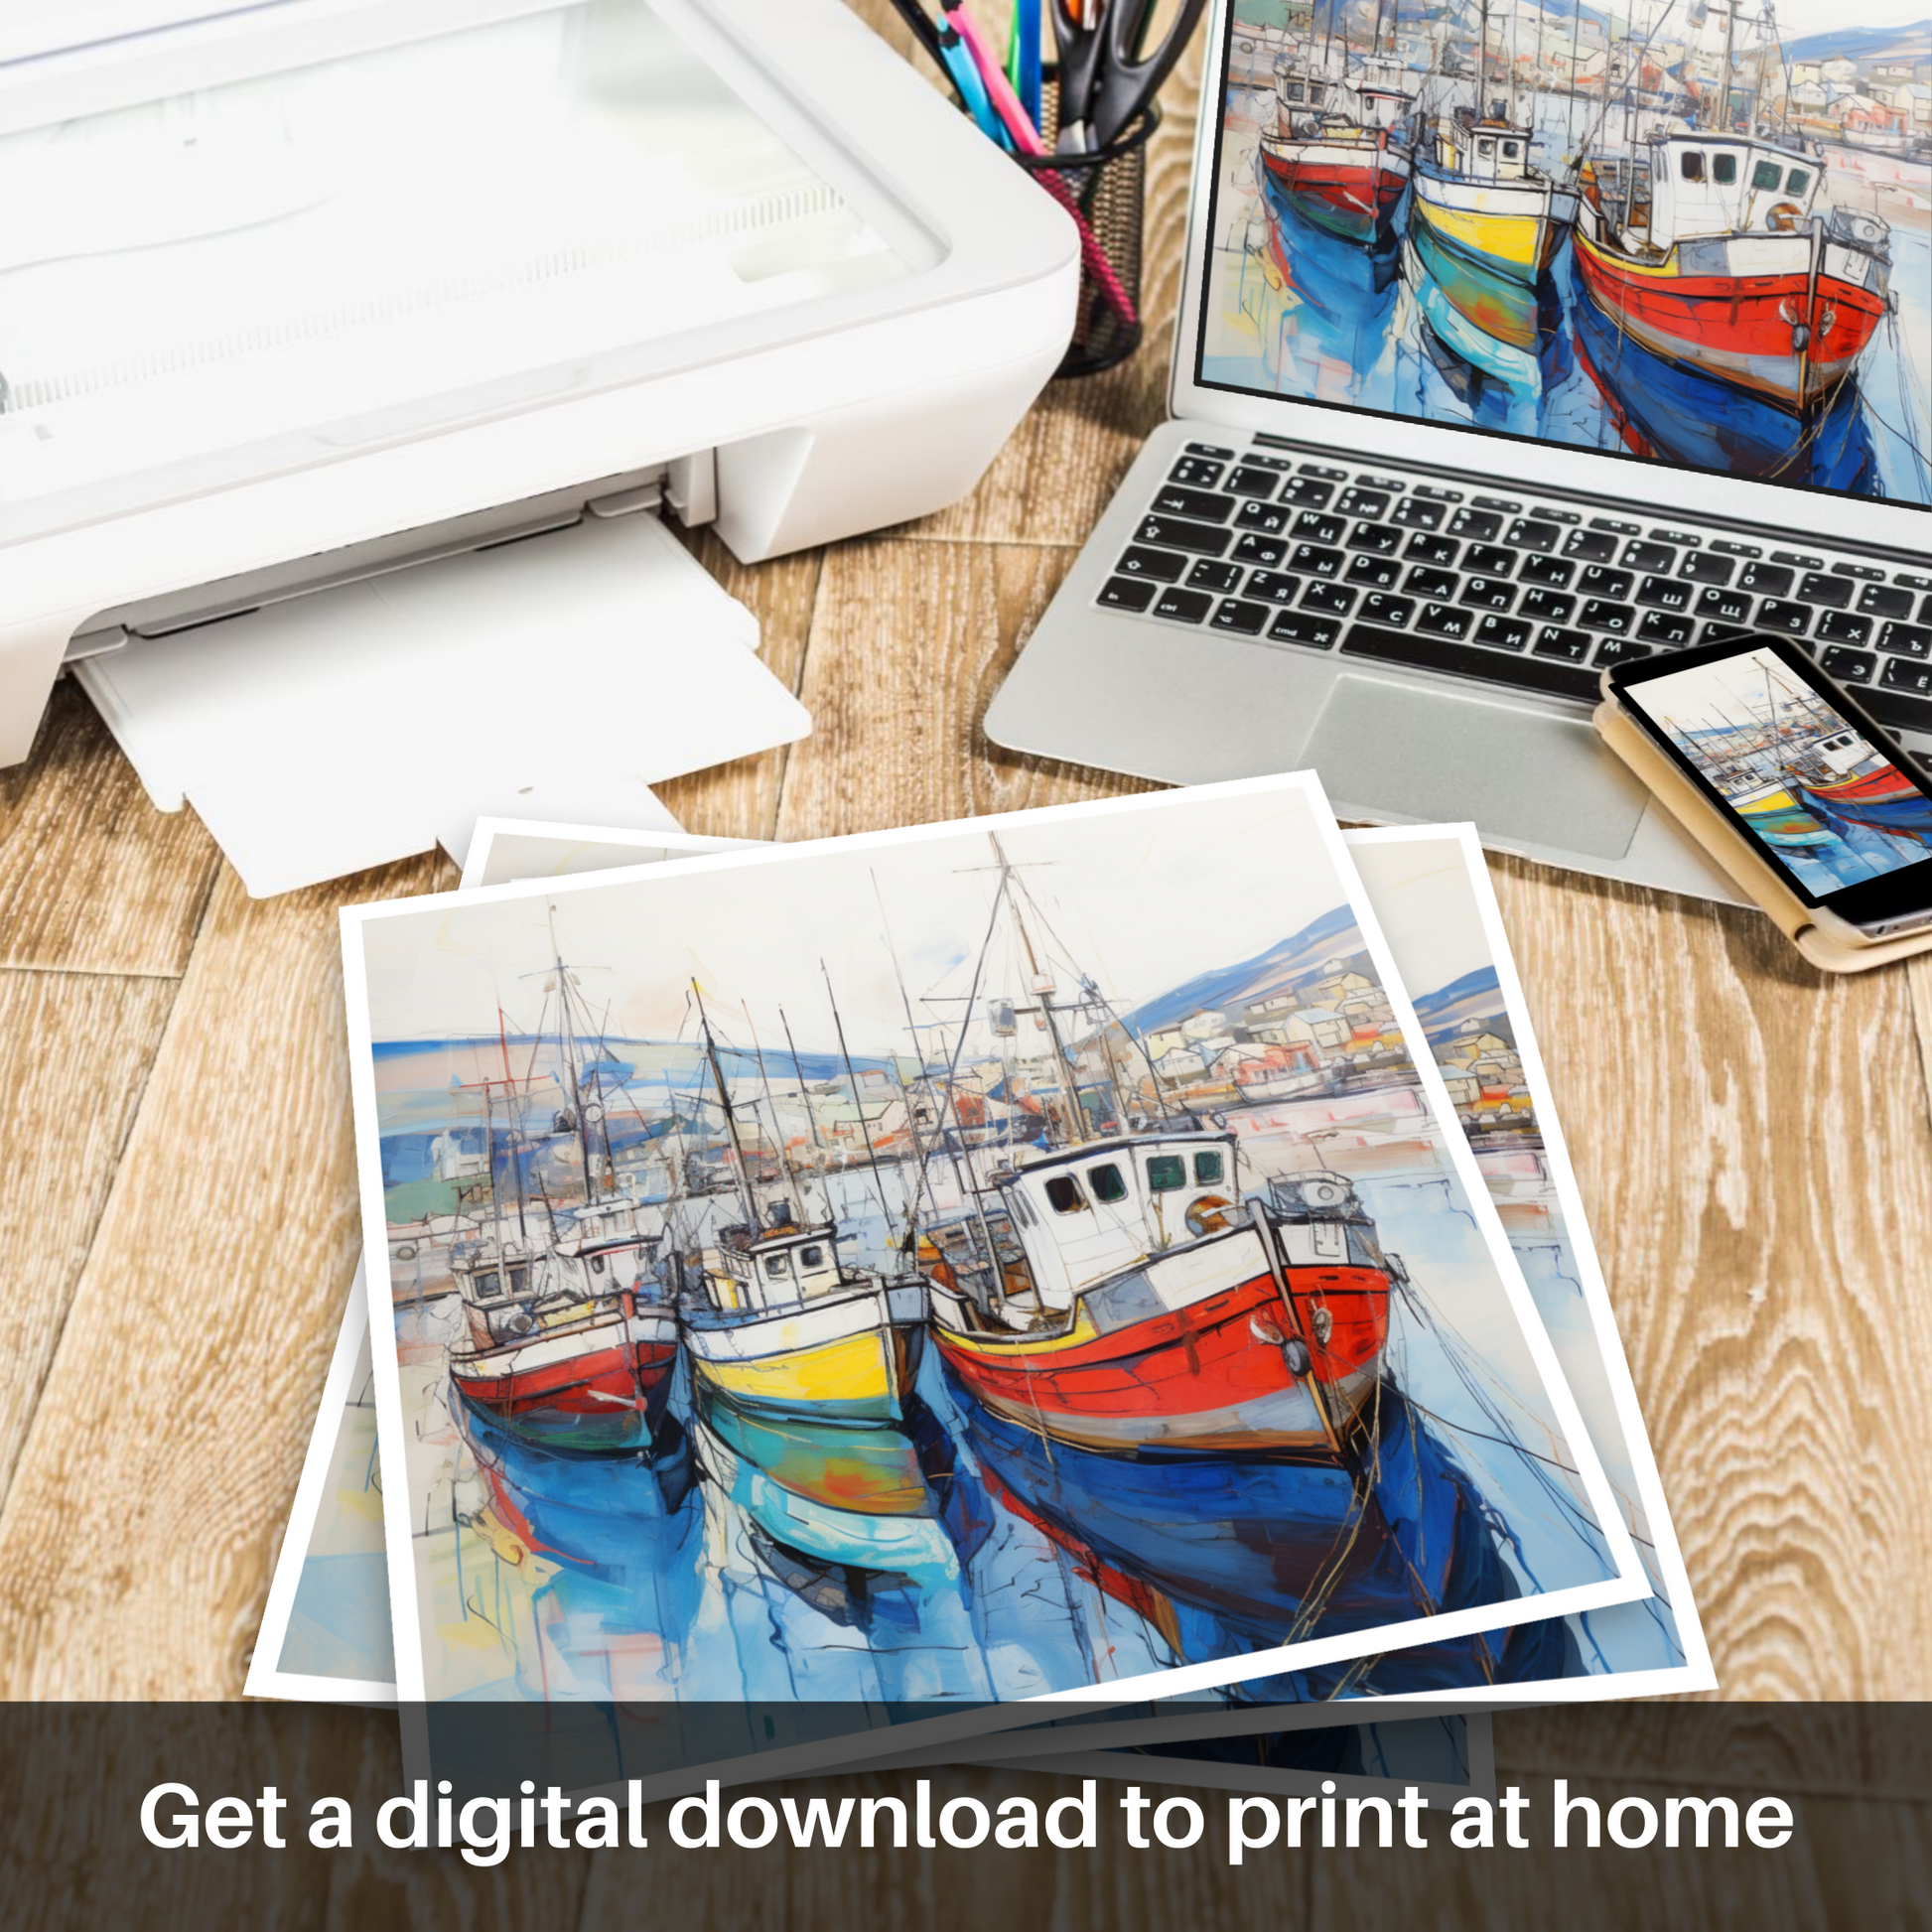 Downloadable and printable picture of Ullapool Harbour